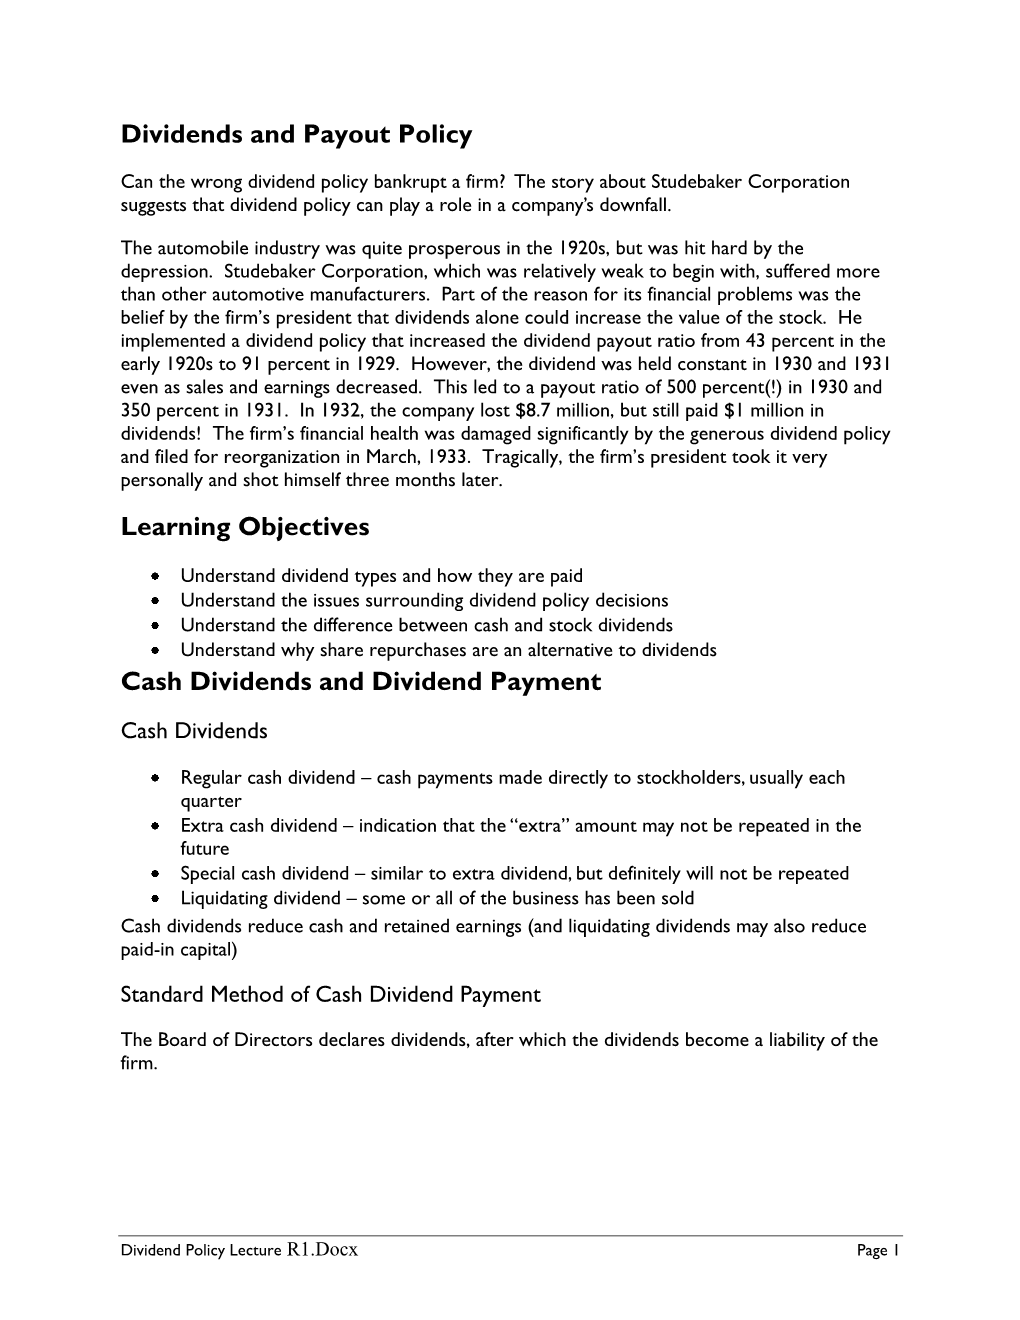 Dividend Policy Lecture R1.Docx Page 1 Dividend Payment Chronology